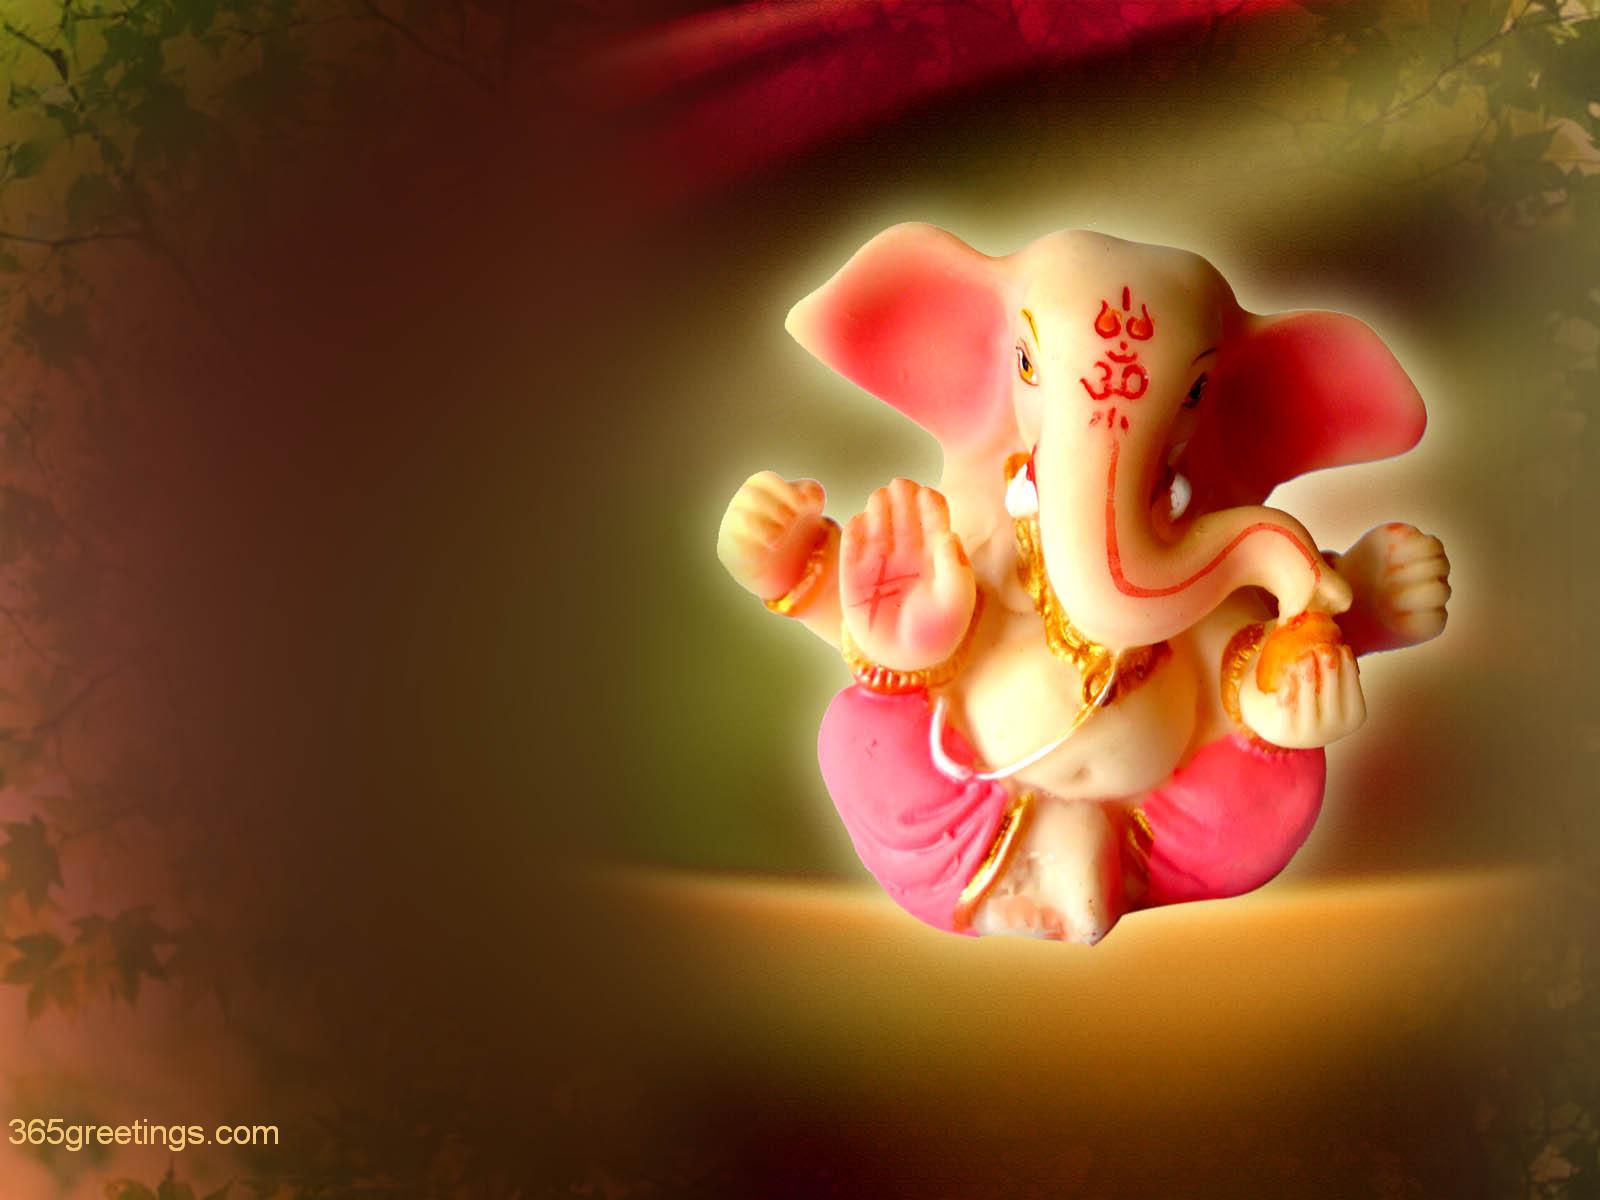 Lord Ganesha Wallpapers Free Lord Ganesha Wallpapers - New Different Dp For  Whatsapp - 1600x1200 Wallpaper 